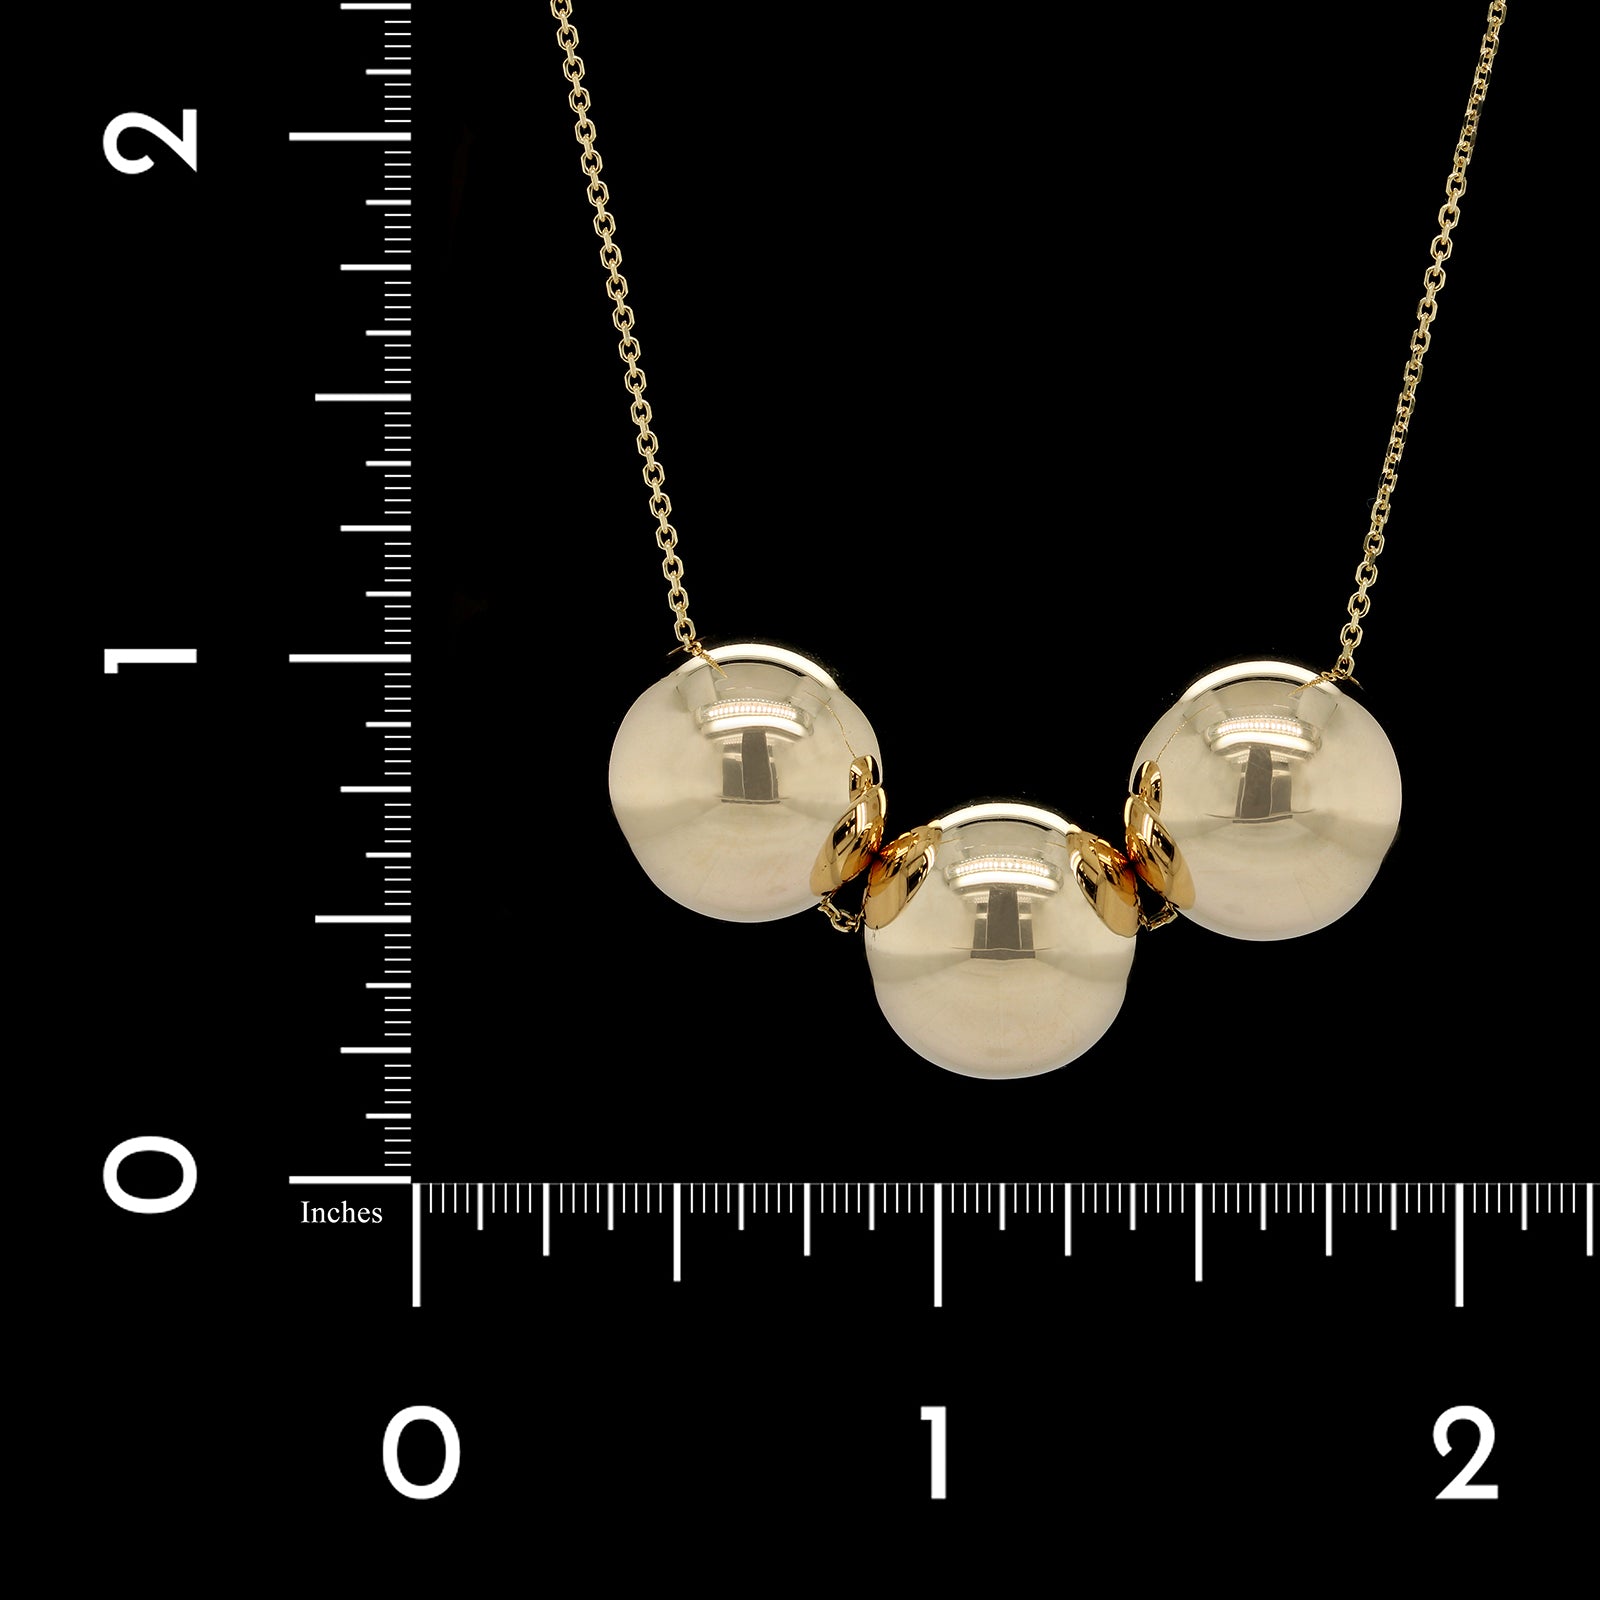 14K Yellow Gold Estate Ball Bead Necklace